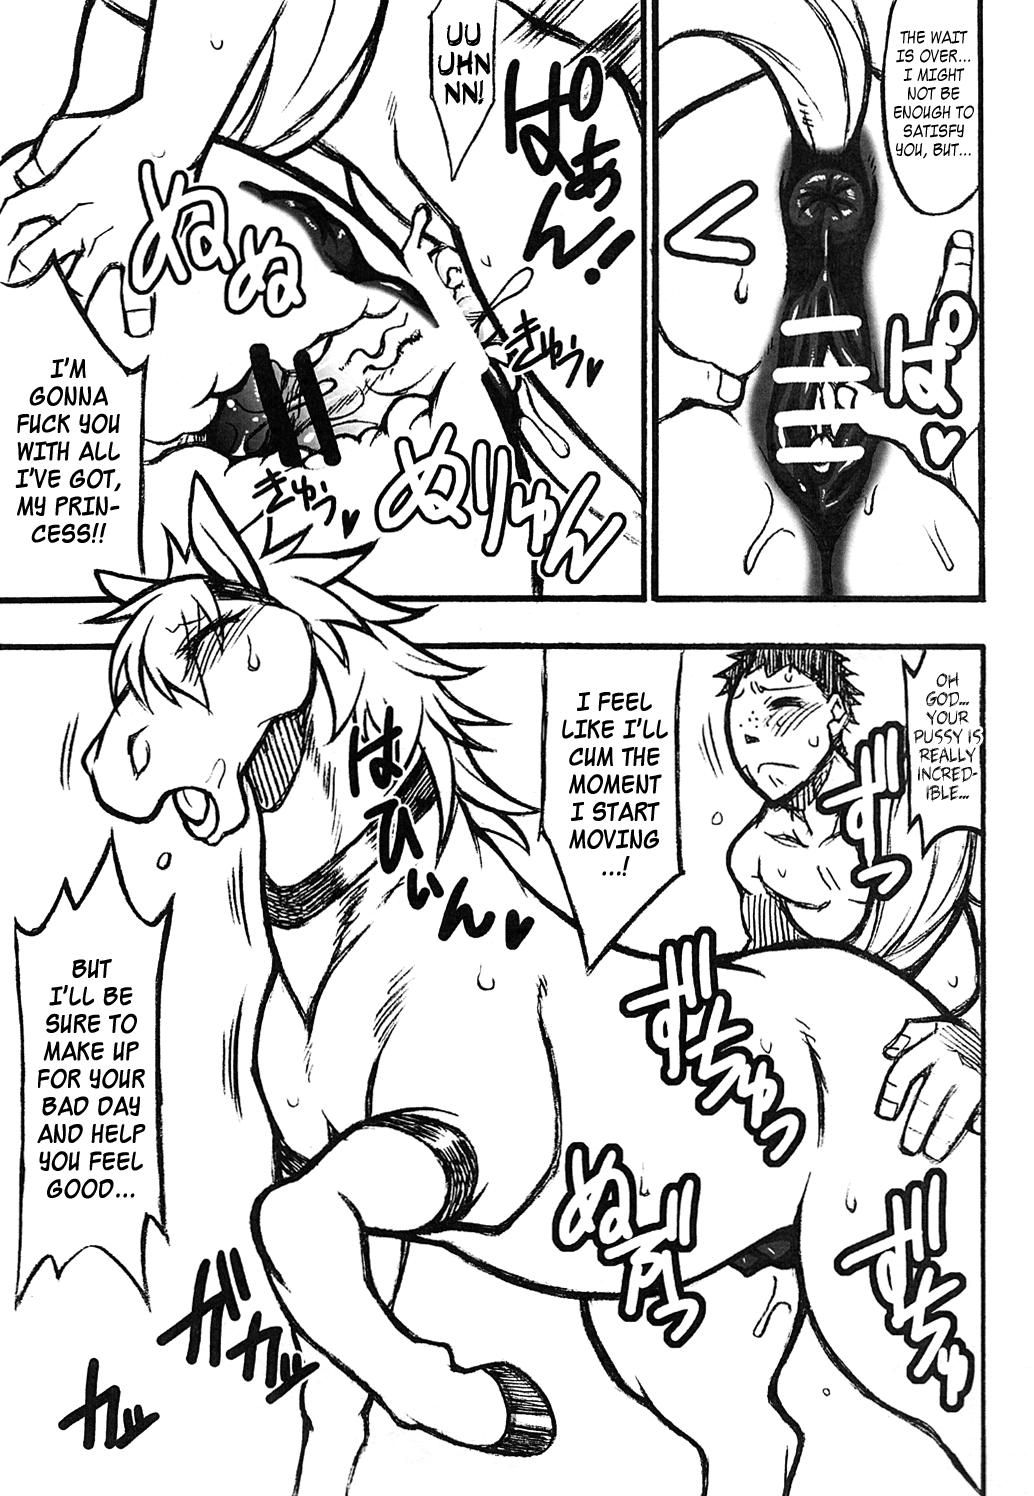 Pay Mare Holic Kemolover EX Ch.1-3 Rubia - Page 9